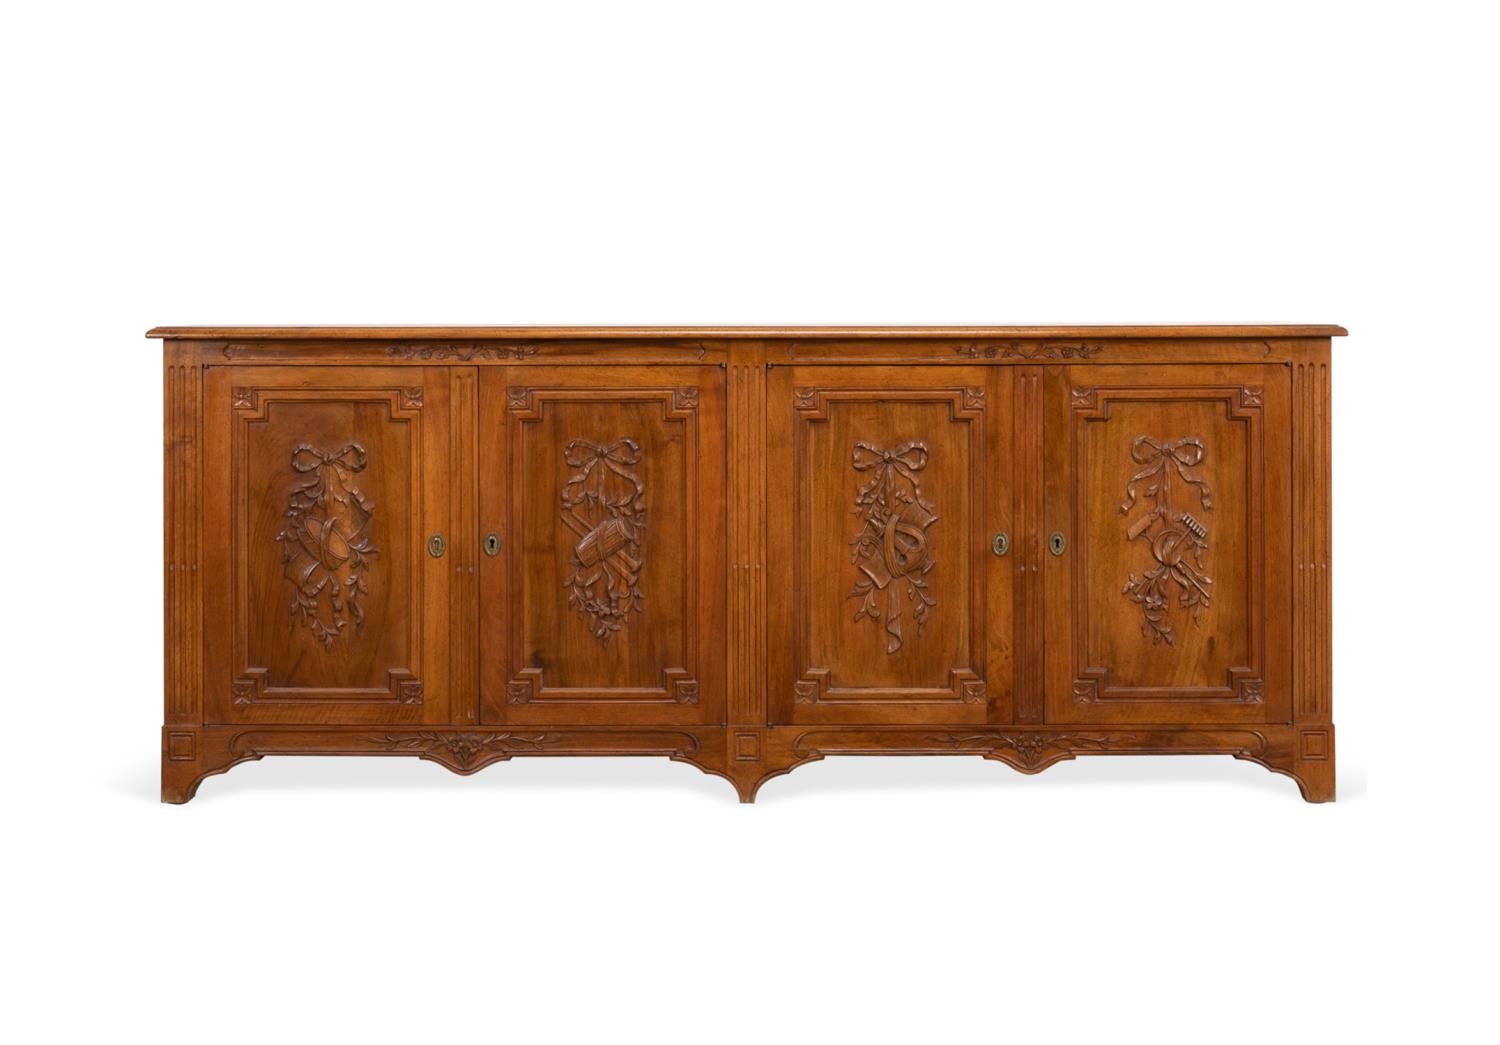 DON RUSEAU FRENCH STYLE FRUITWOOD